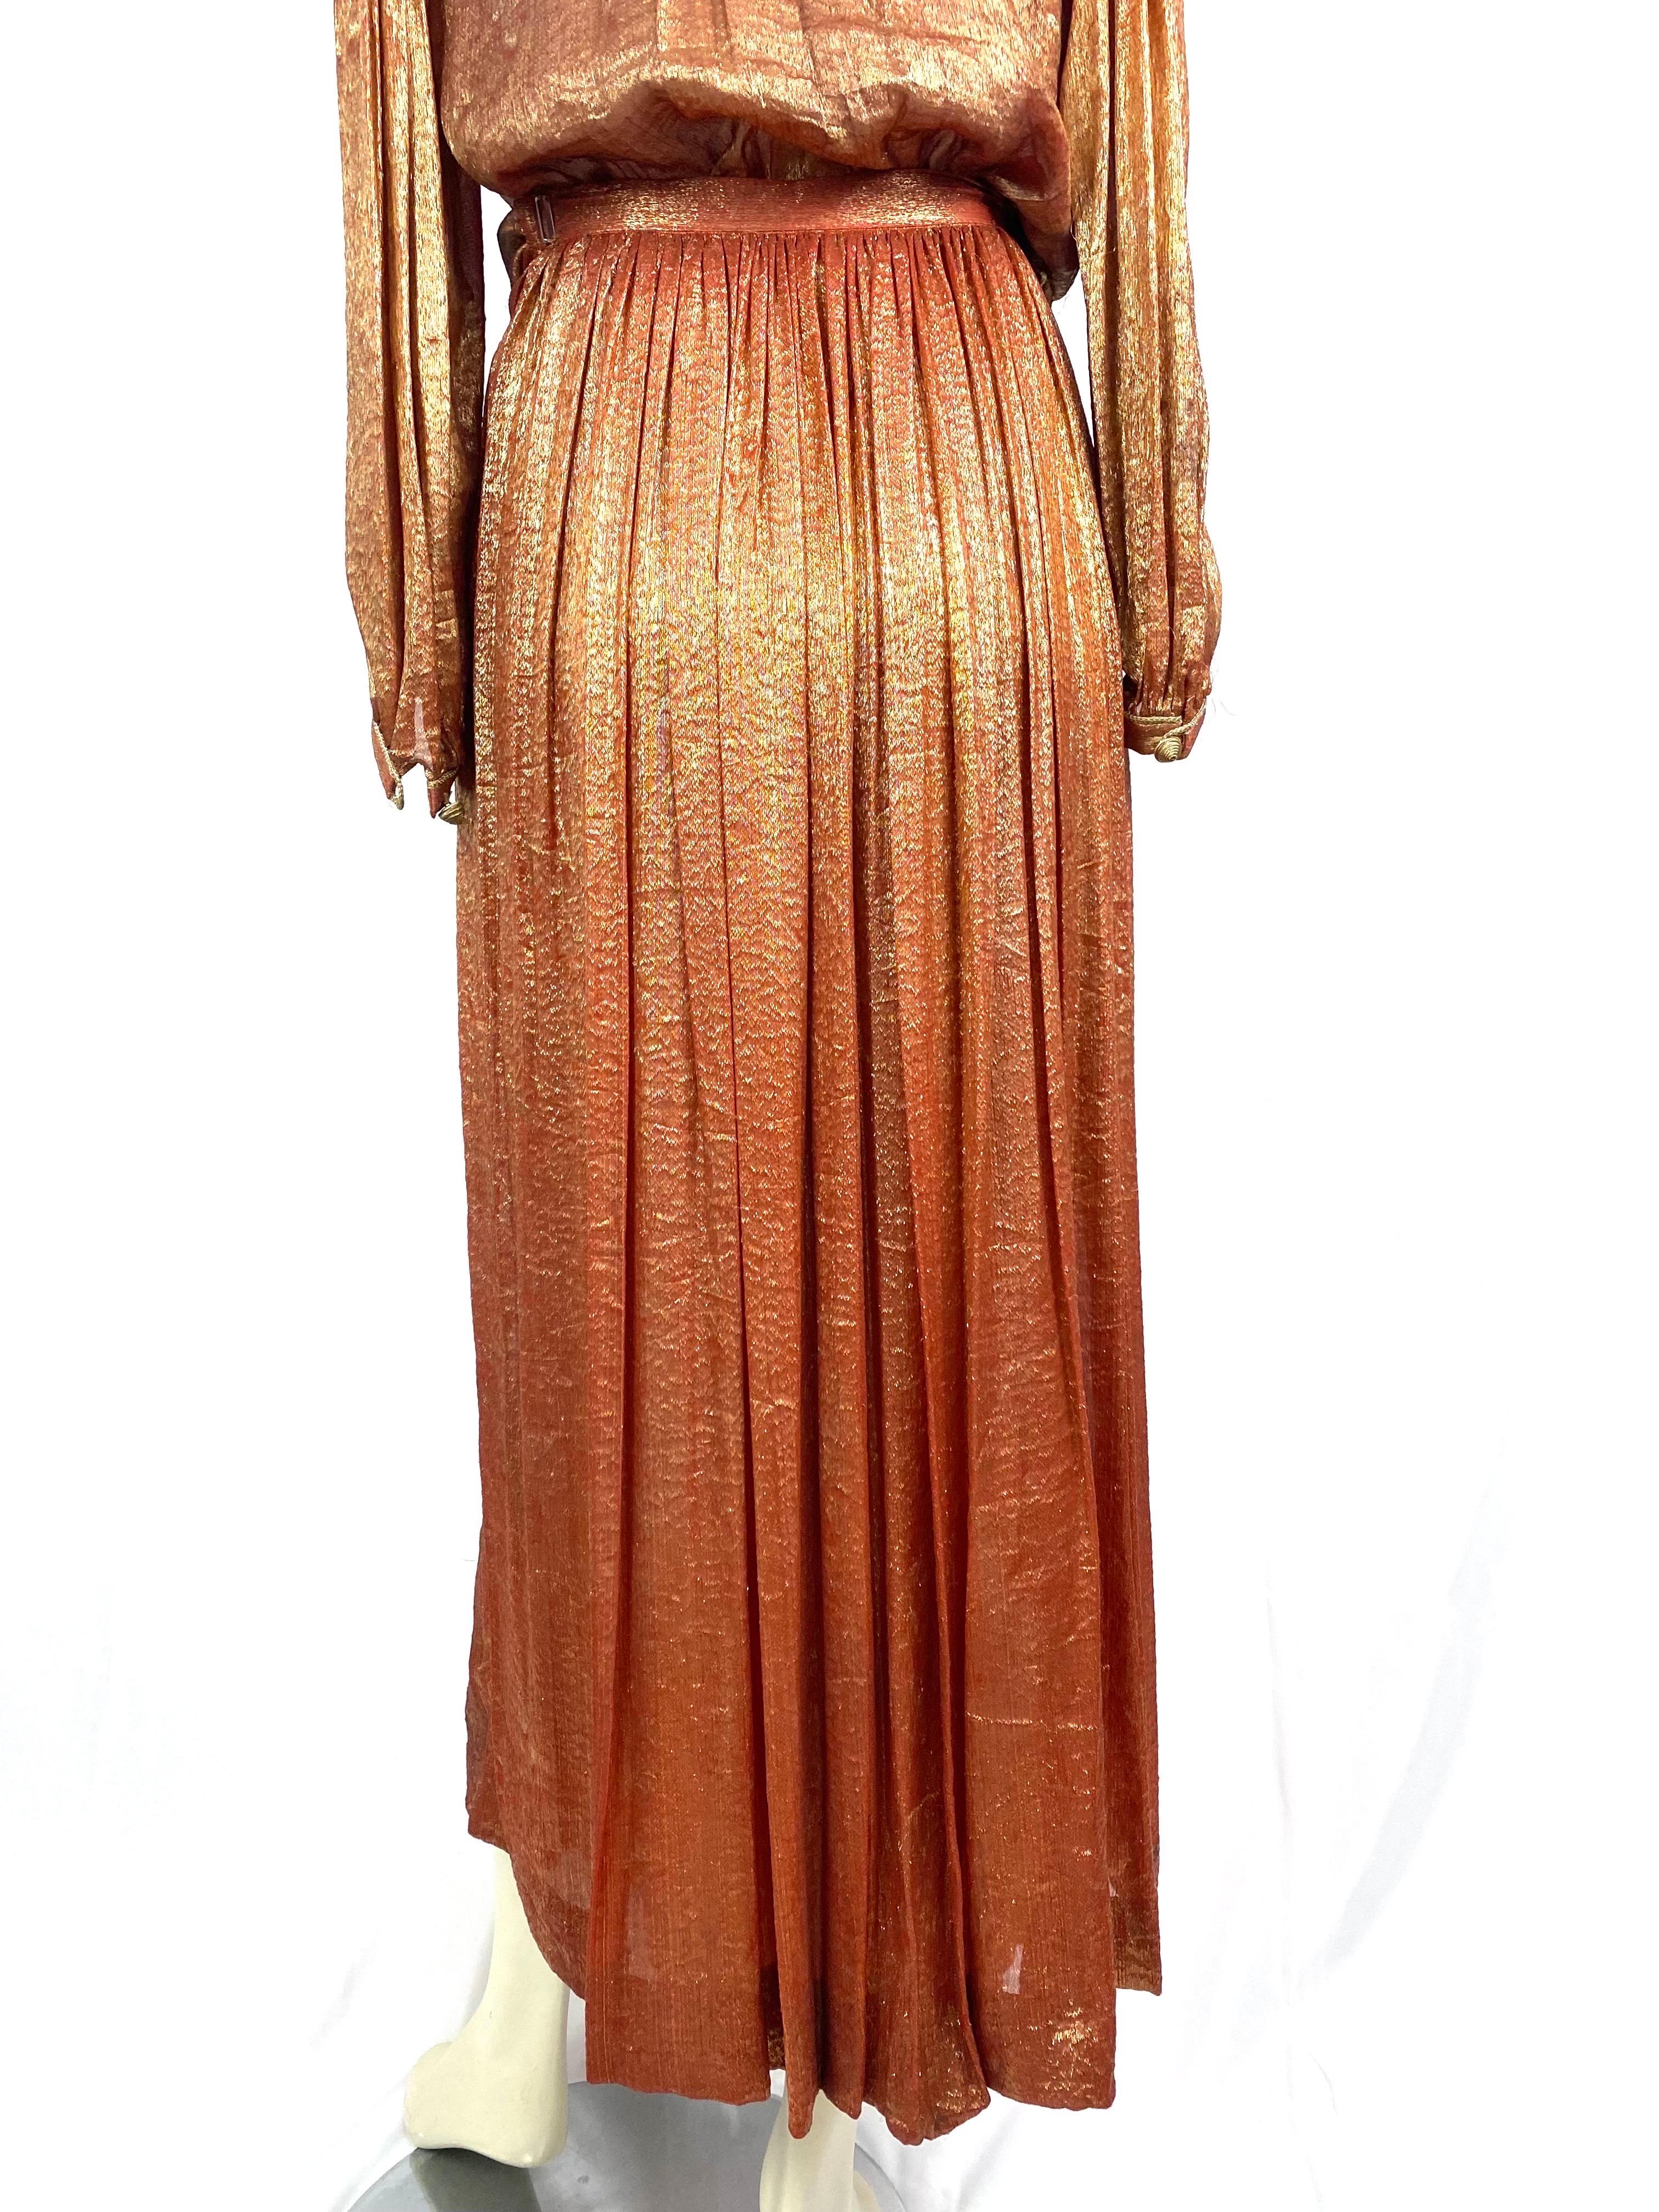 Vintage set from the 1970s by Yves Saint Laurent in gold and bronze silk lamé 1